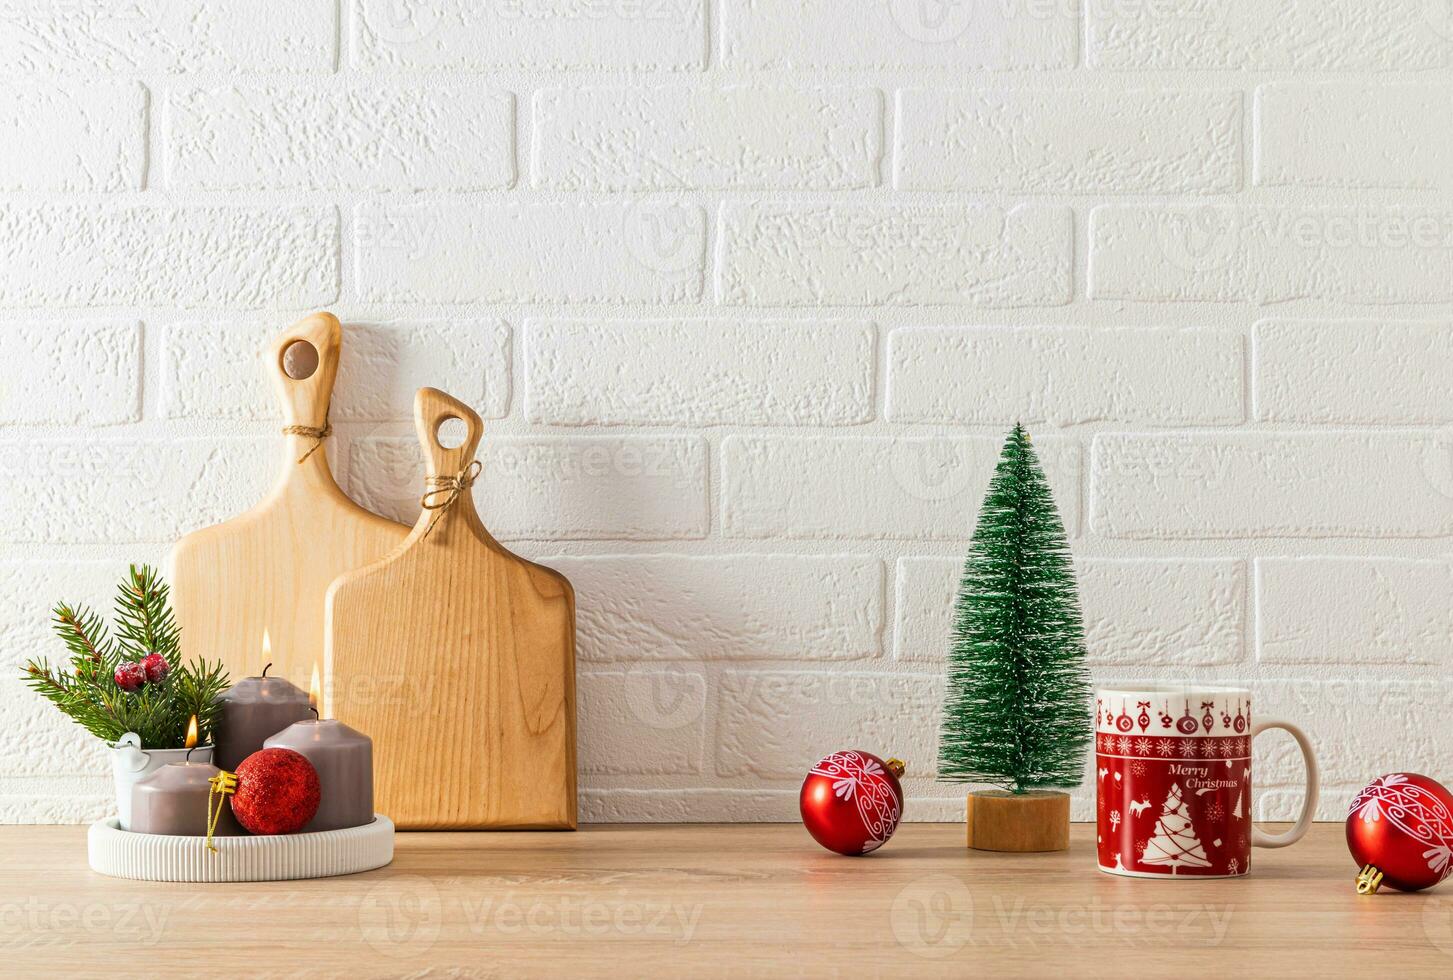 Red mugs with Christmas pattern, candle set, red ball and decorative Christmas tree on kitchen countertop. Festive kitchen background. minimalism. photo